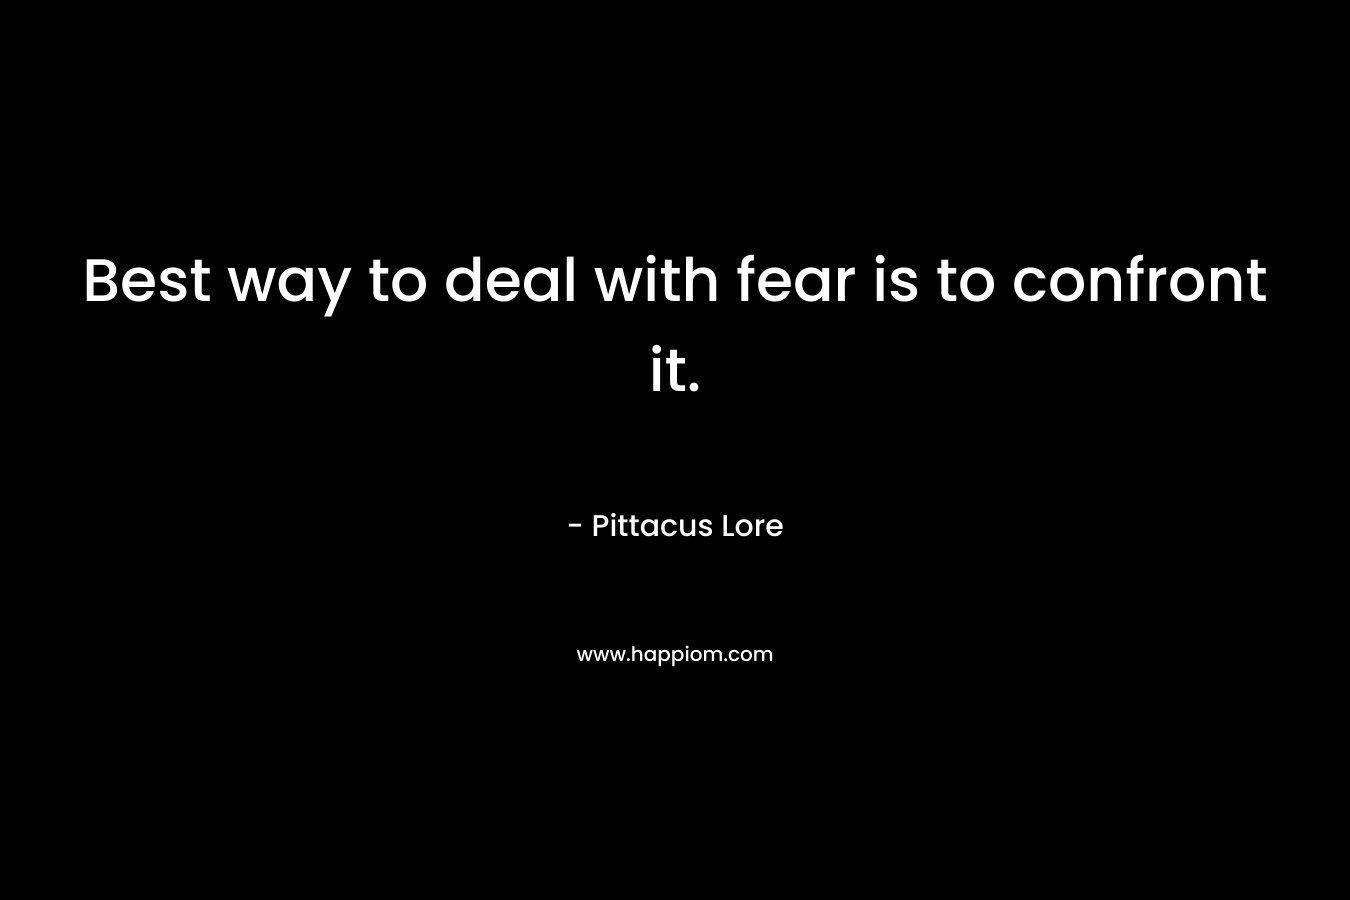 Best way to deal with fear is to confront it. – Pittacus Lore